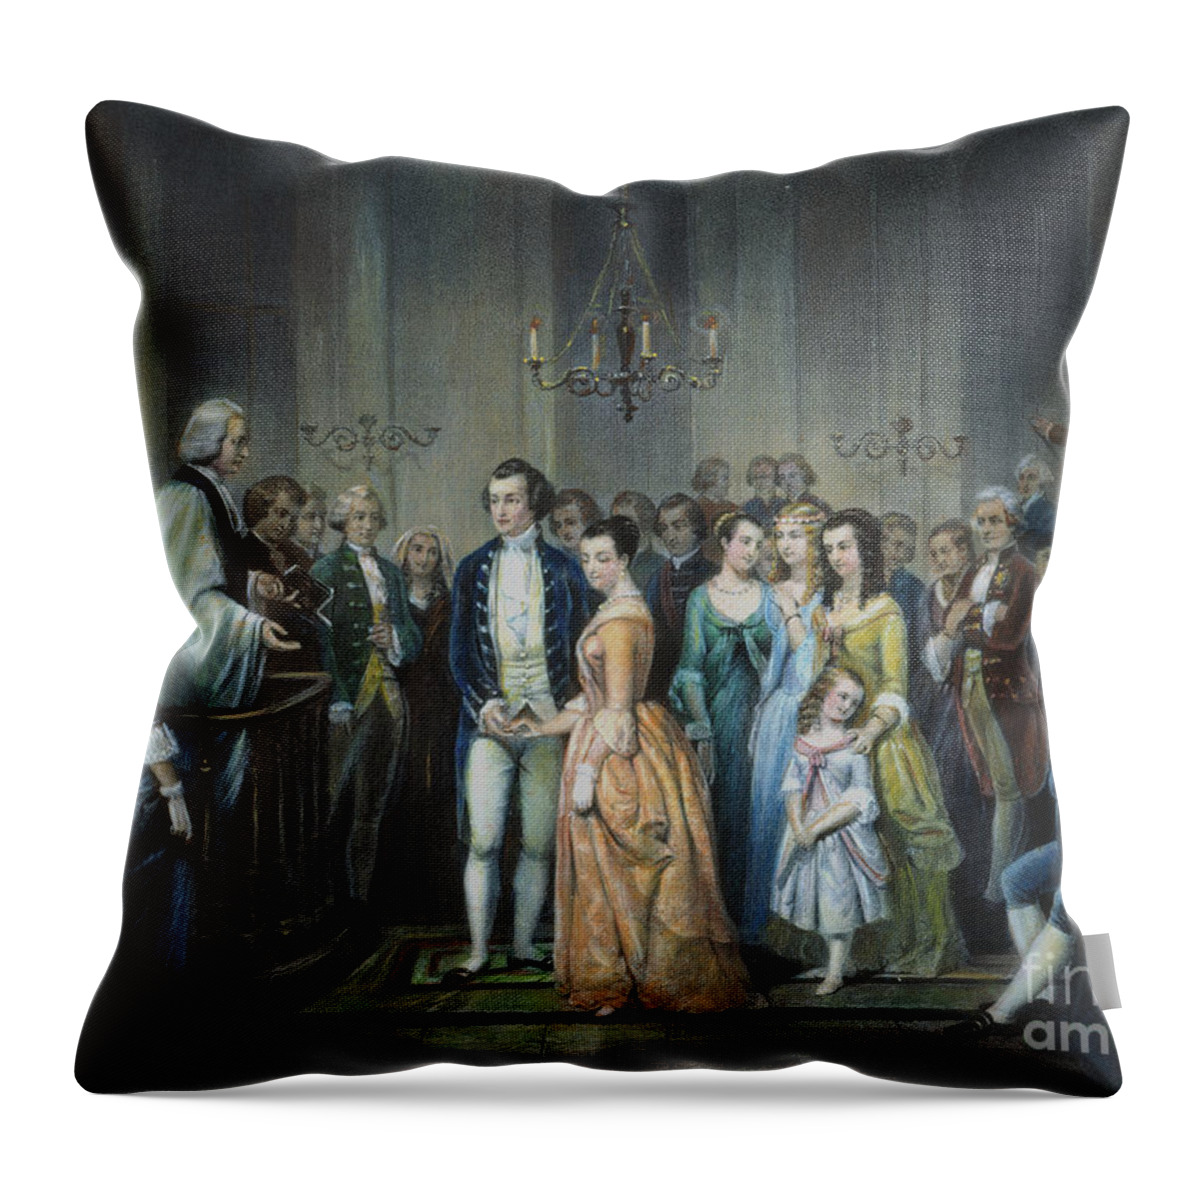 1759 Throw Pillow featuring the photograph Washingtons Marriage by Granger